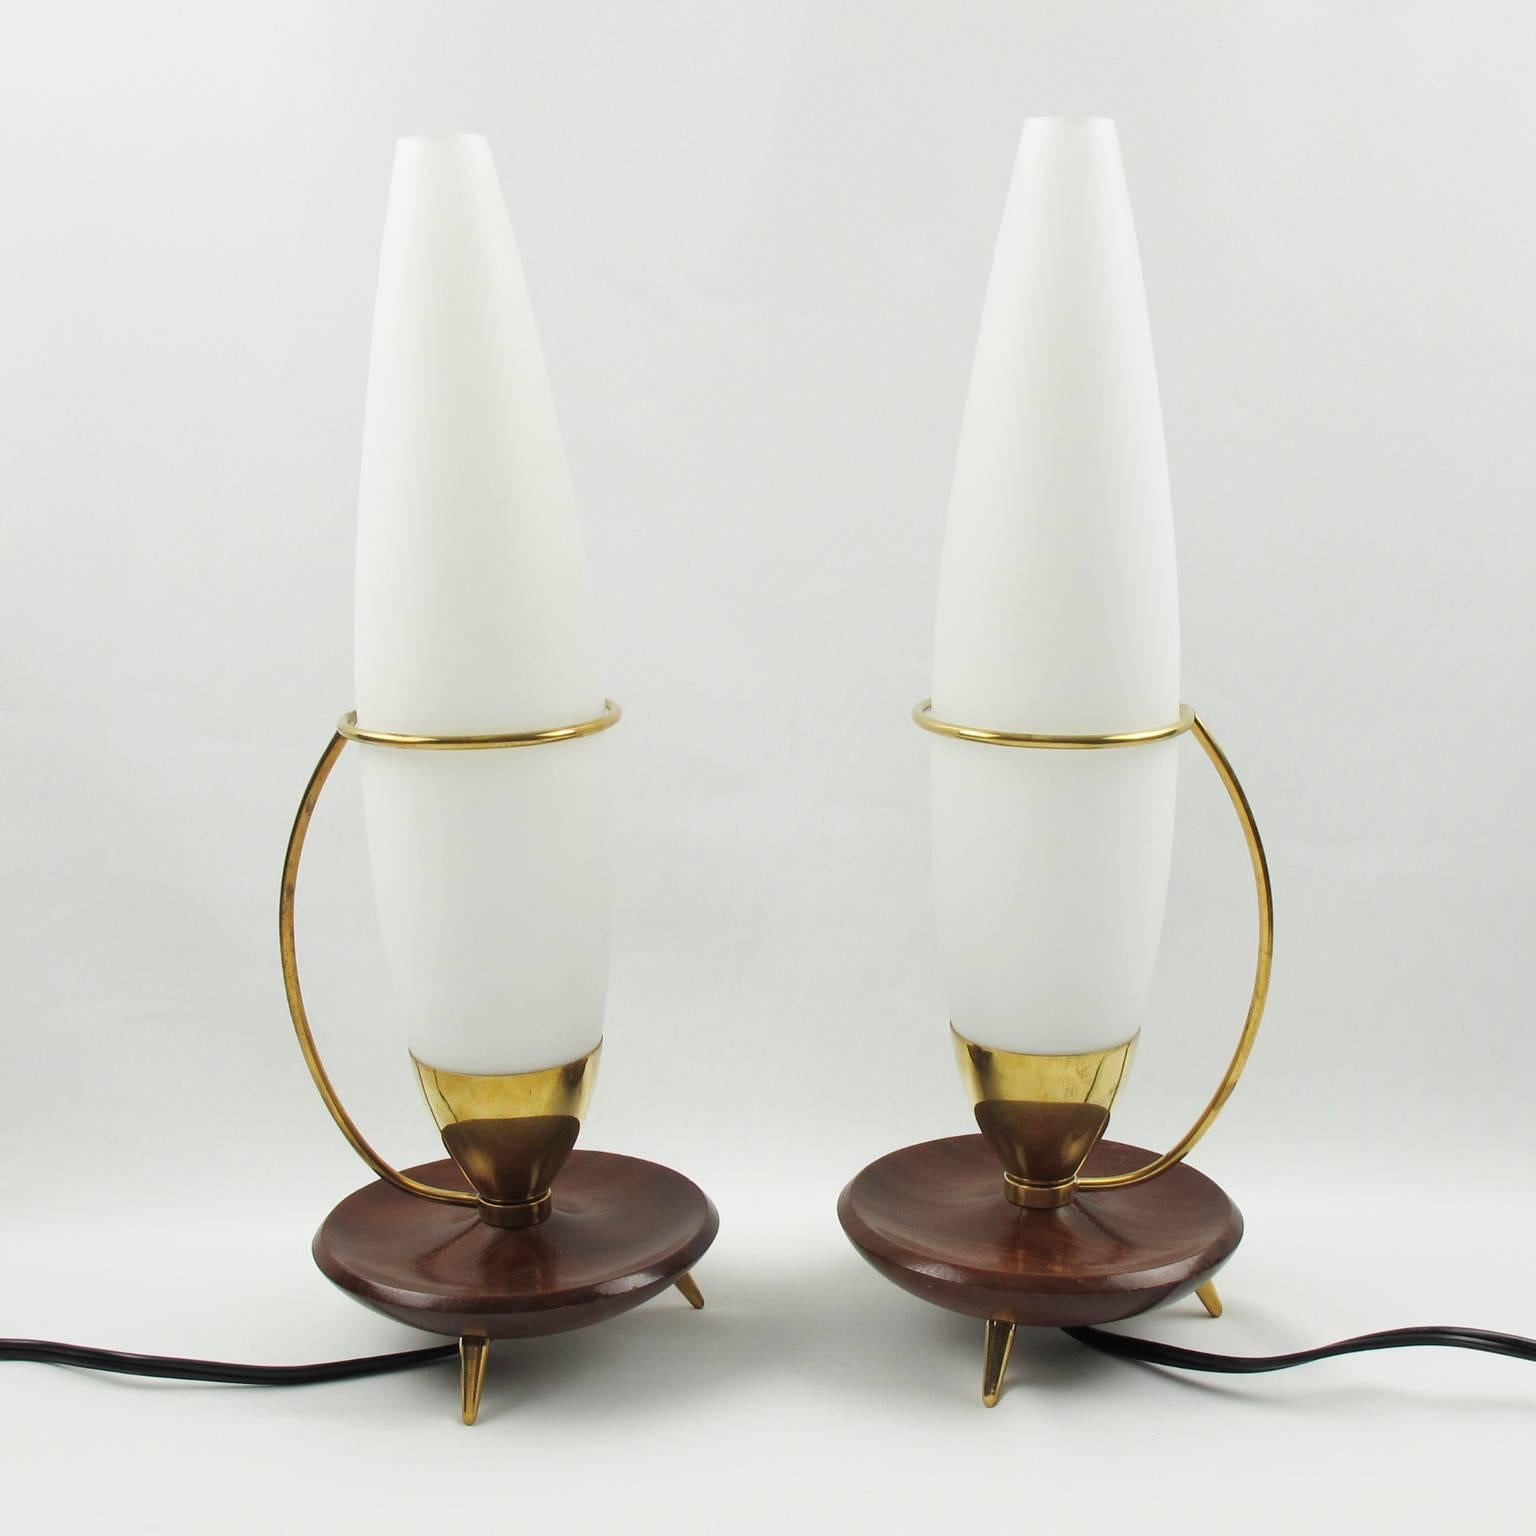 Stunning pair of Mid-Century Modernist Danish table lamps, circa 1950s. Space Age design with Sputnik shape, featuring teak and gilded brass base in a flying saucer shape. Gilded brass holder for original elongated white opaline glass shade. Rewired